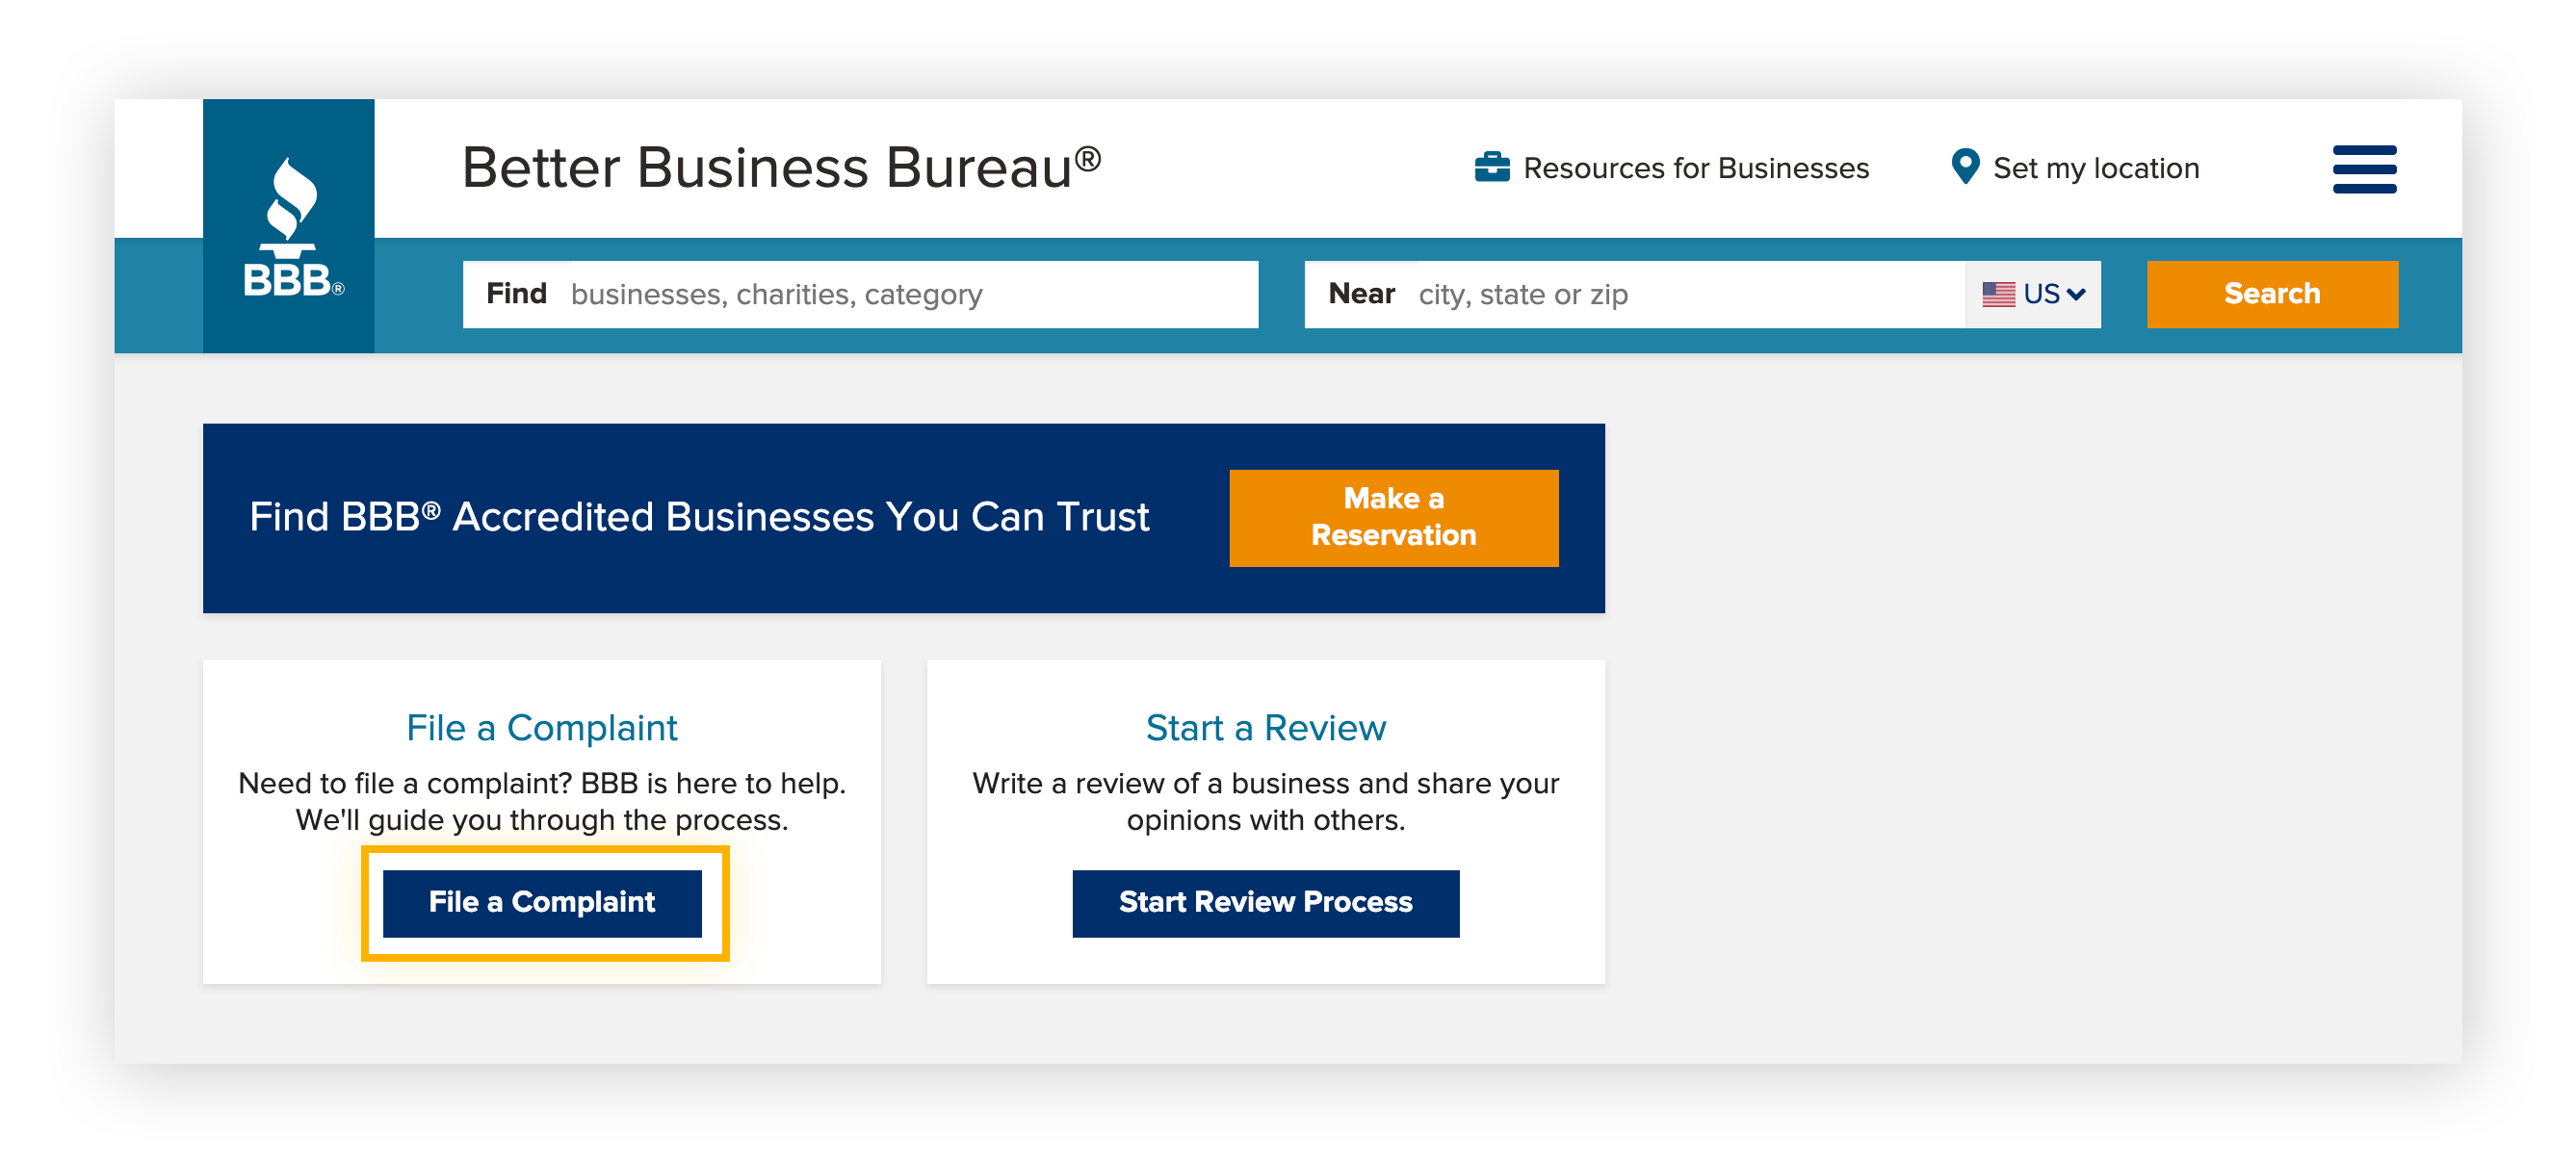 The Better Business Bureau helps consumers take action against poor or illegal business practices.